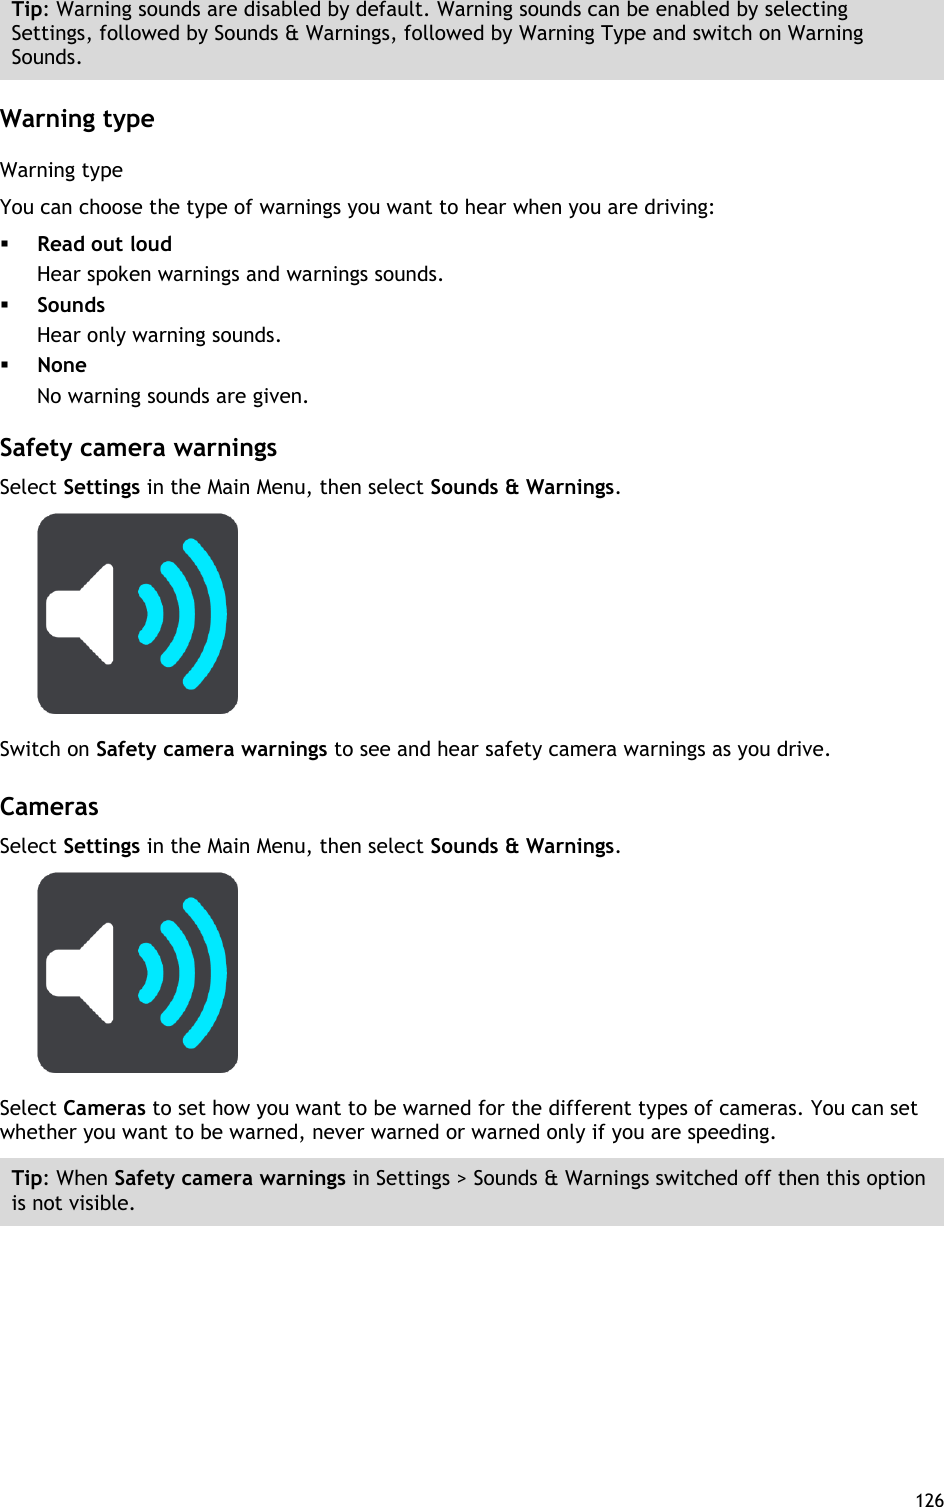  126  Tip: Warning sounds are disabled by default. Warning sounds can be enabled by selecting Settings, followed by Sounds &amp; Warnings, followed by Warning Type and switch on Warning Sounds.  Warning type Warning type You can choose the type of warnings you want to hear when you are driving:  Read out loud Hear spoken warnings and warnings sounds.  Sounds Hear only warning sounds.  None No warning sounds are given.  Safety camera warnings Select Settings in the Main Menu, then select Sounds &amp; Warnings.    Switch on Safety camera warnings to see and hear safety camera warnings as you drive.    Cameras Select Settings in the Main Menu, then select Sounds &amp; Warnings.    Select Cameras to set how you want to be warned for the different types of cameras. You can set whether you want to be warned, never warned or warned only if you are speeding. Tip: When Safety camera warnings in Settings &gt; Sounds &amp; Warnings switched off then this option is not visible.  